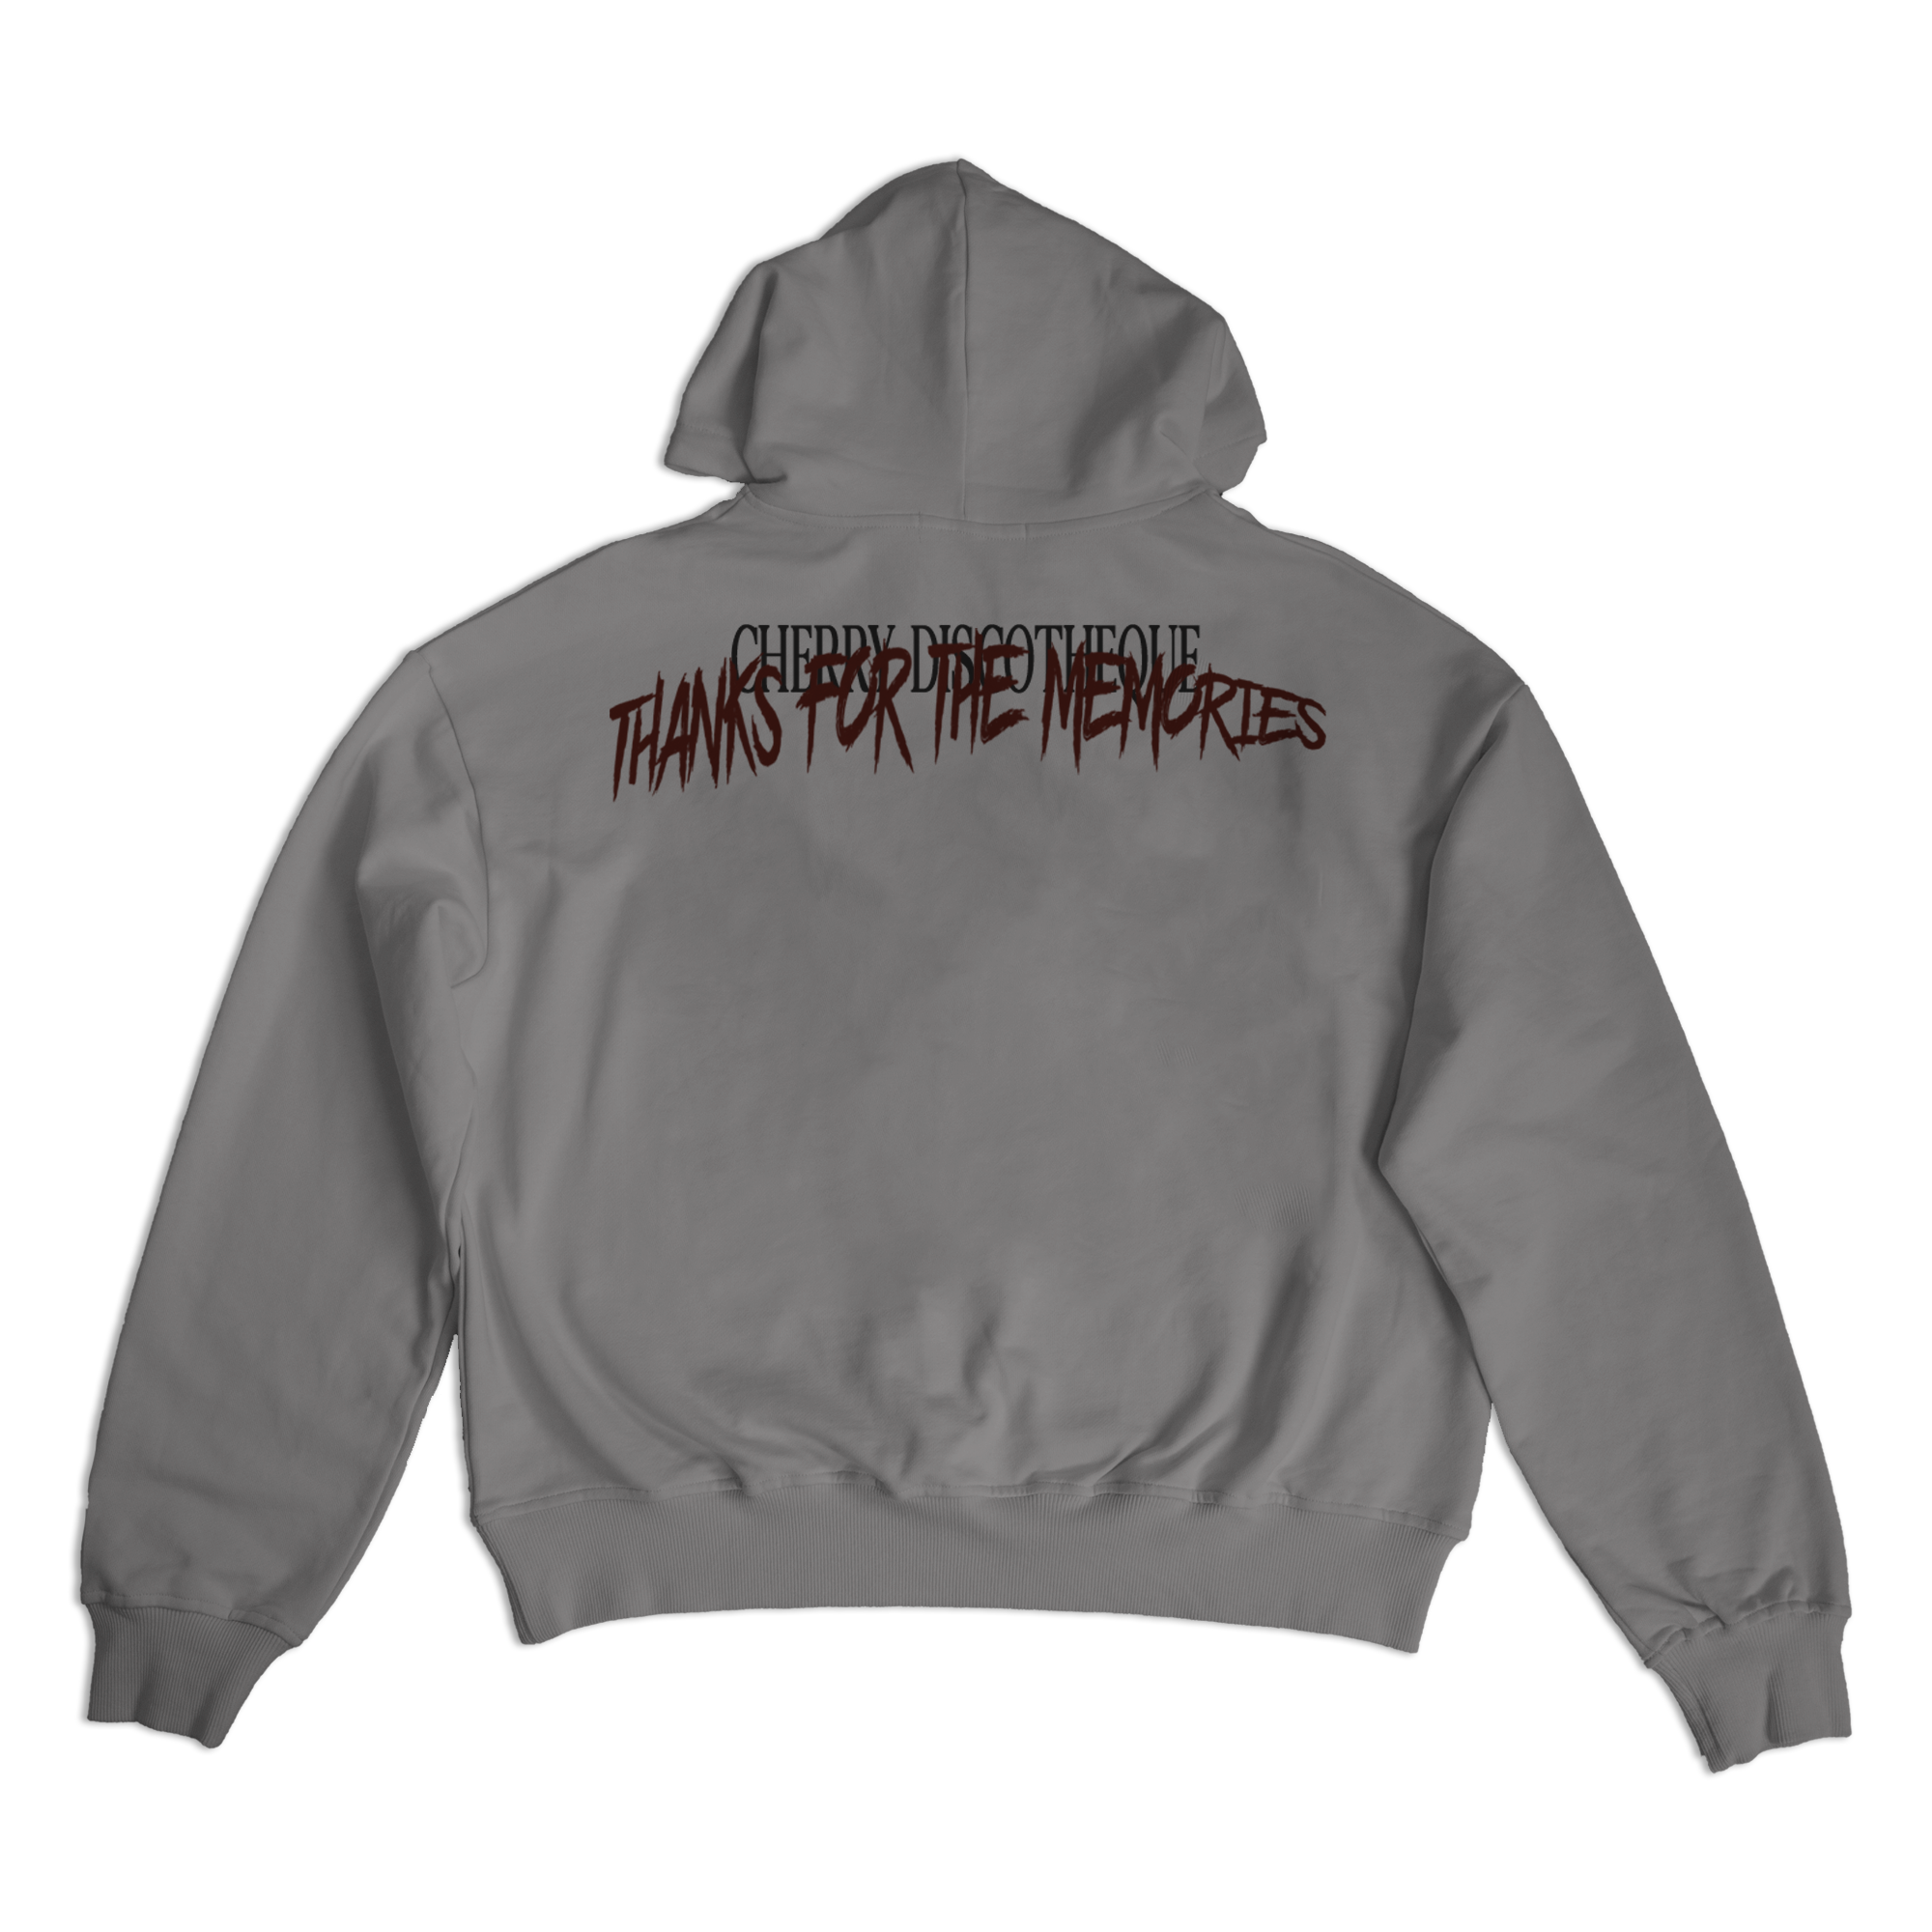 THANK FOR THE MEMORIES HOODIE IN GREY